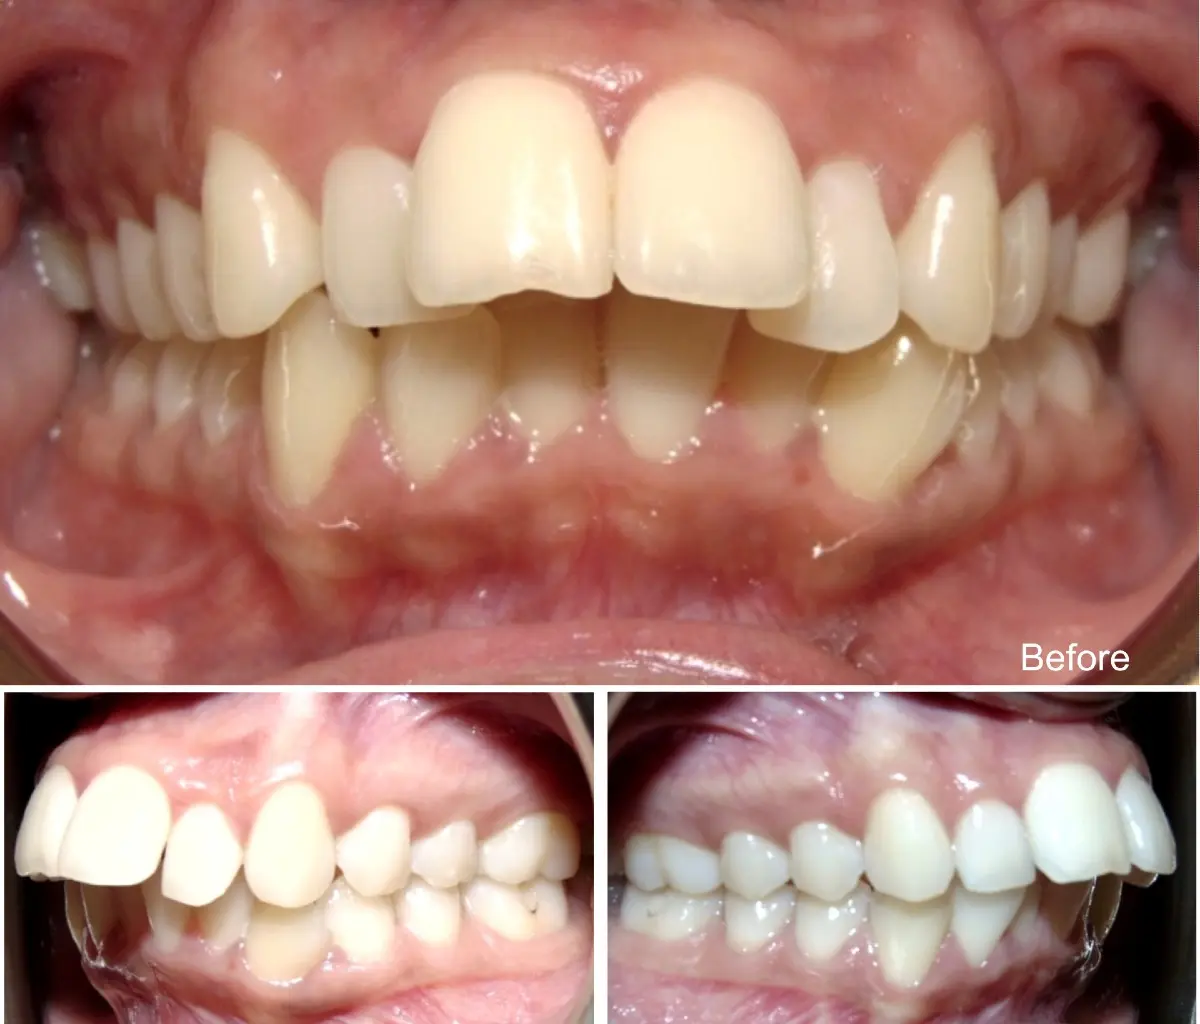 jugdeep 23 years old overjet and overbite before invisalign treatment